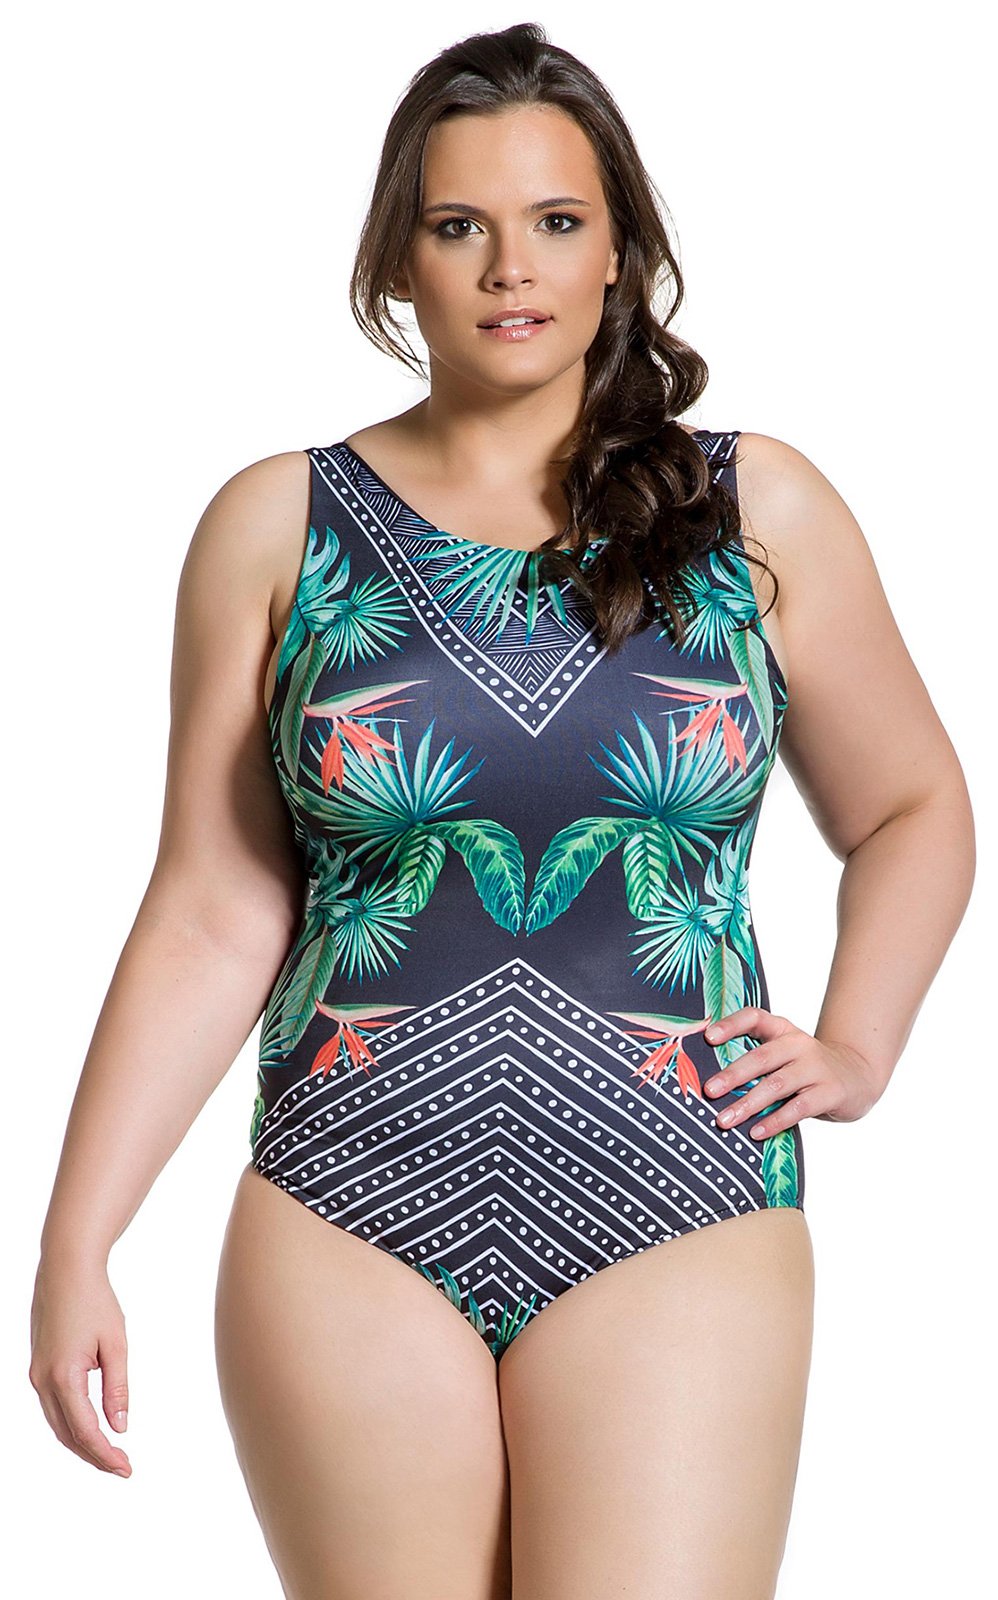 Plus Size One Piece Swimsuit In Geometric And Tropical Print Body